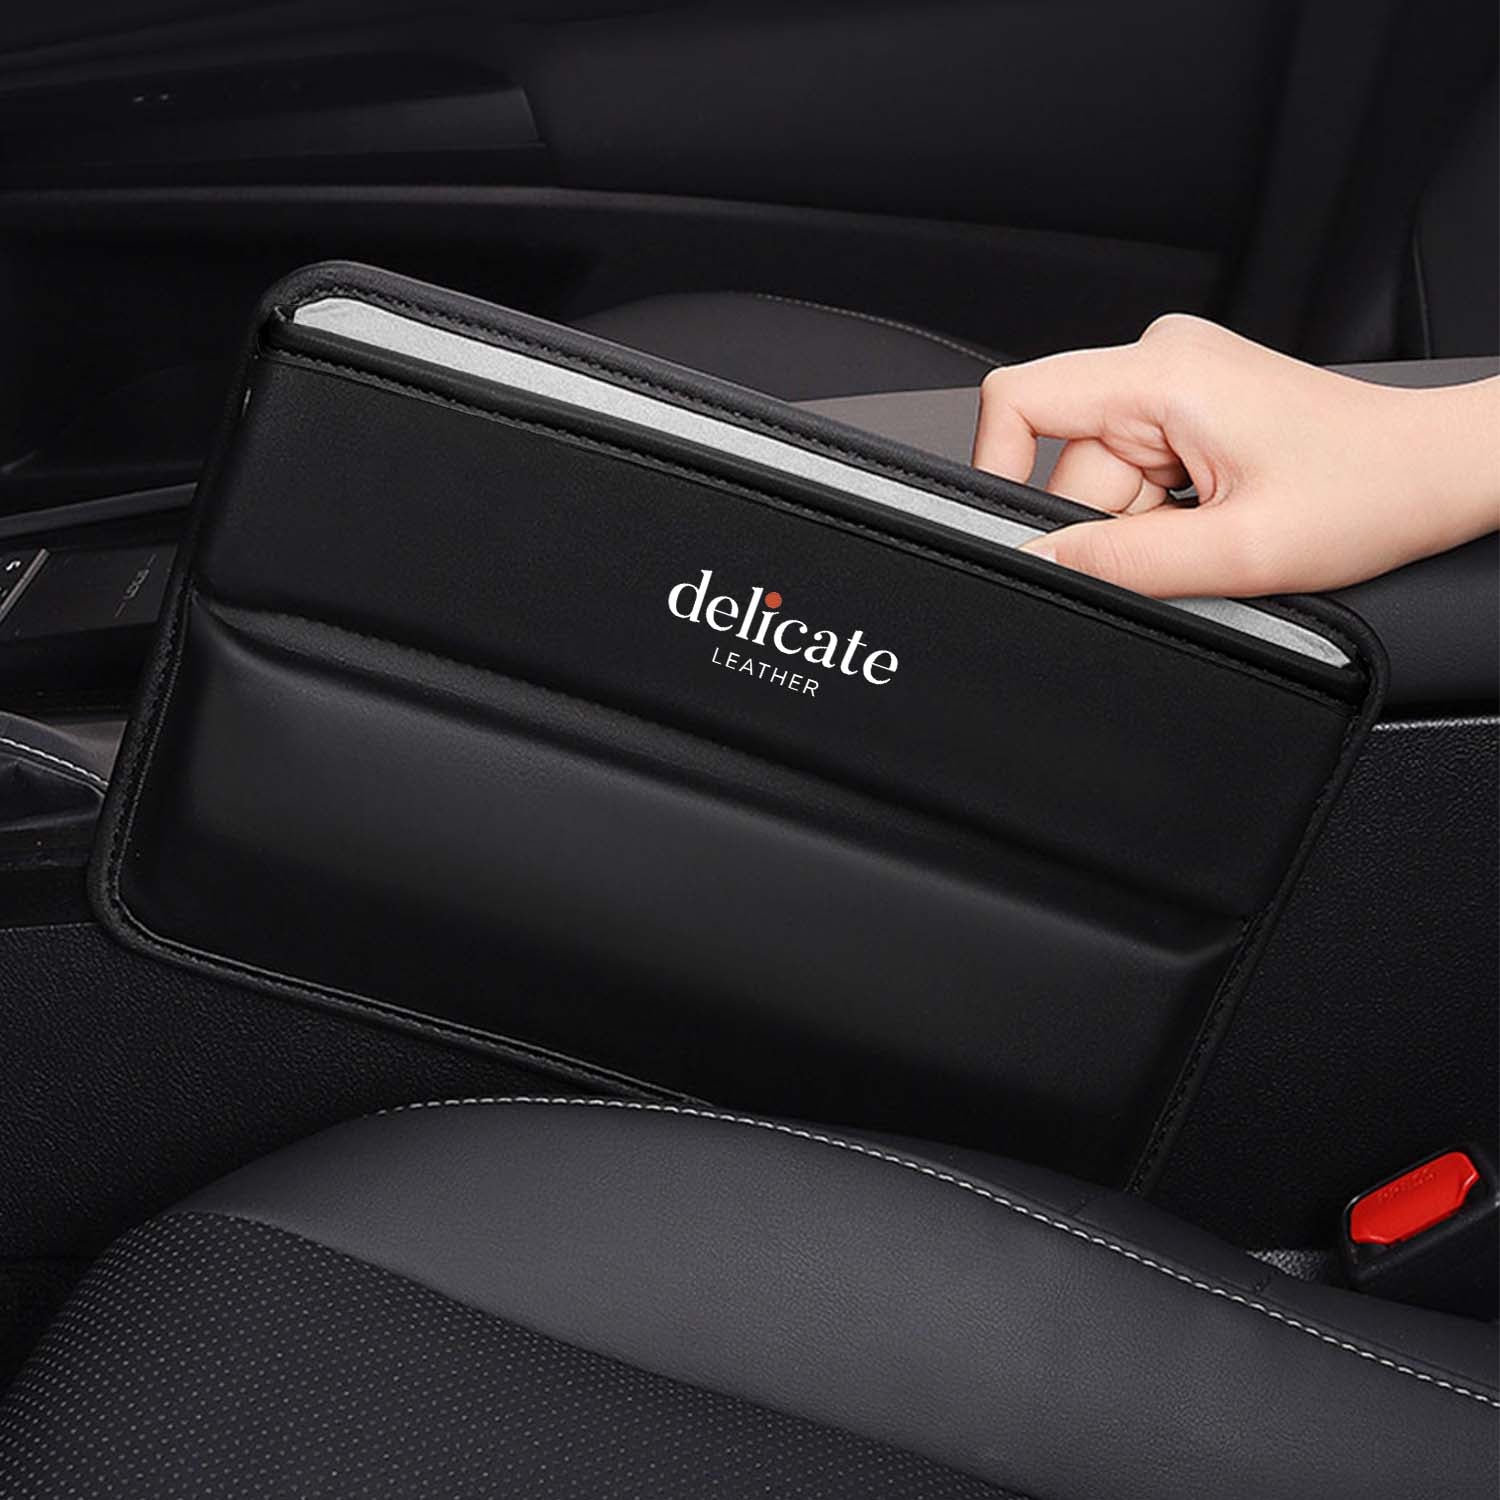 Car Seat Gap Filler Organizer, Custom Fir For Your Cars, Multifunctional PU Leather Console Side Pocket Organizer for Cellphones, Cards, Wallets, Keys